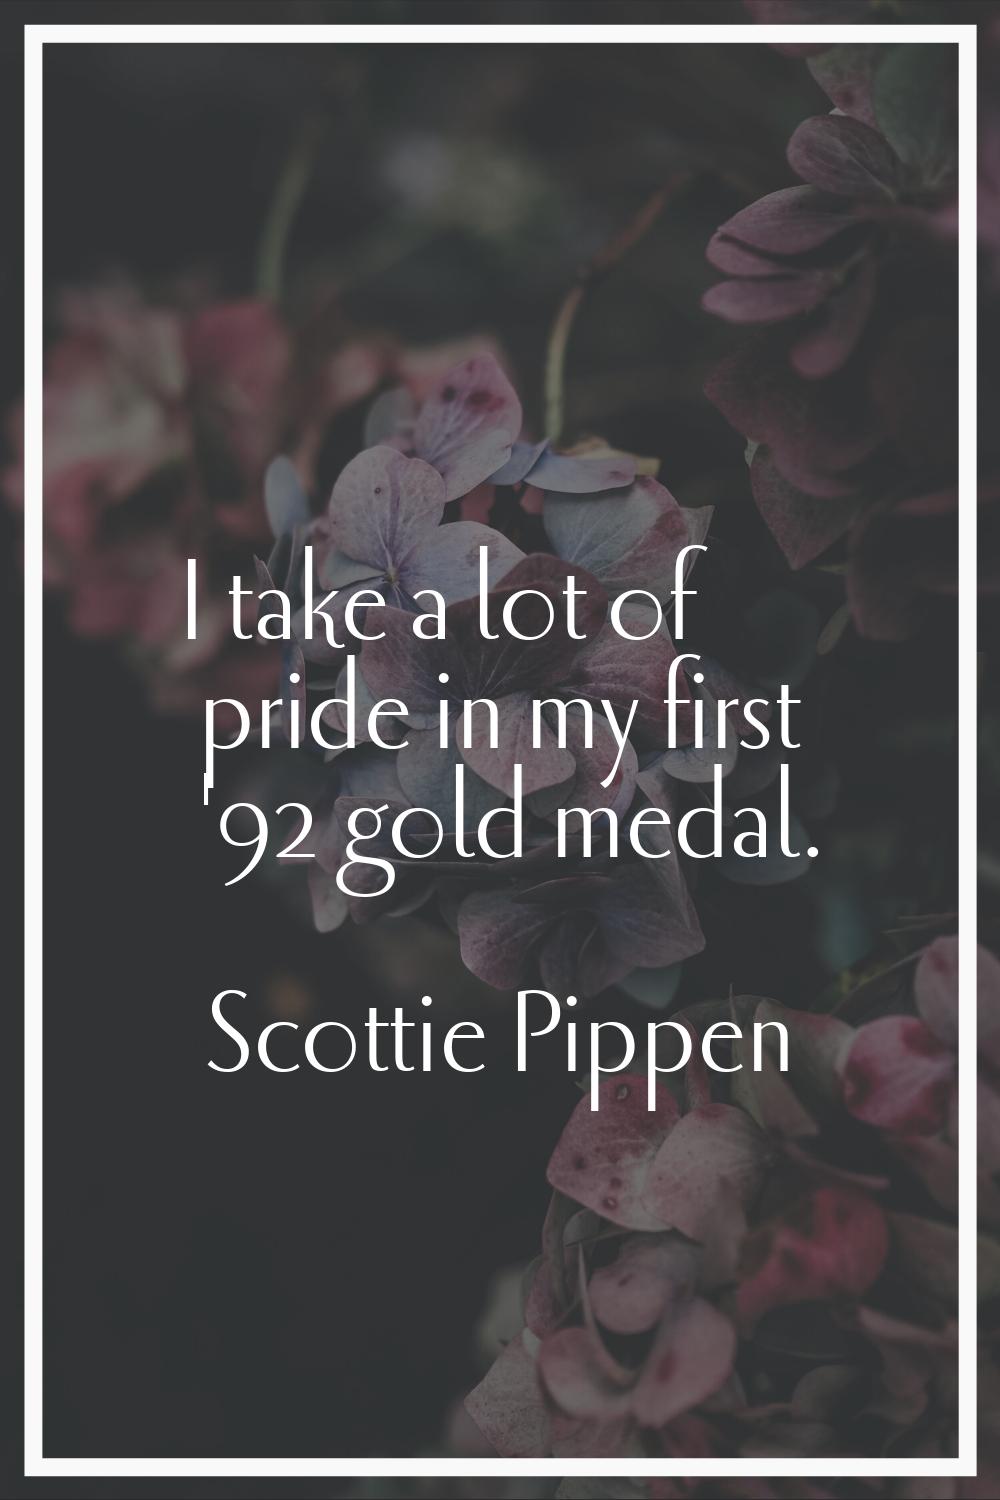 I take a lot of pride in my first '92 gold medal.